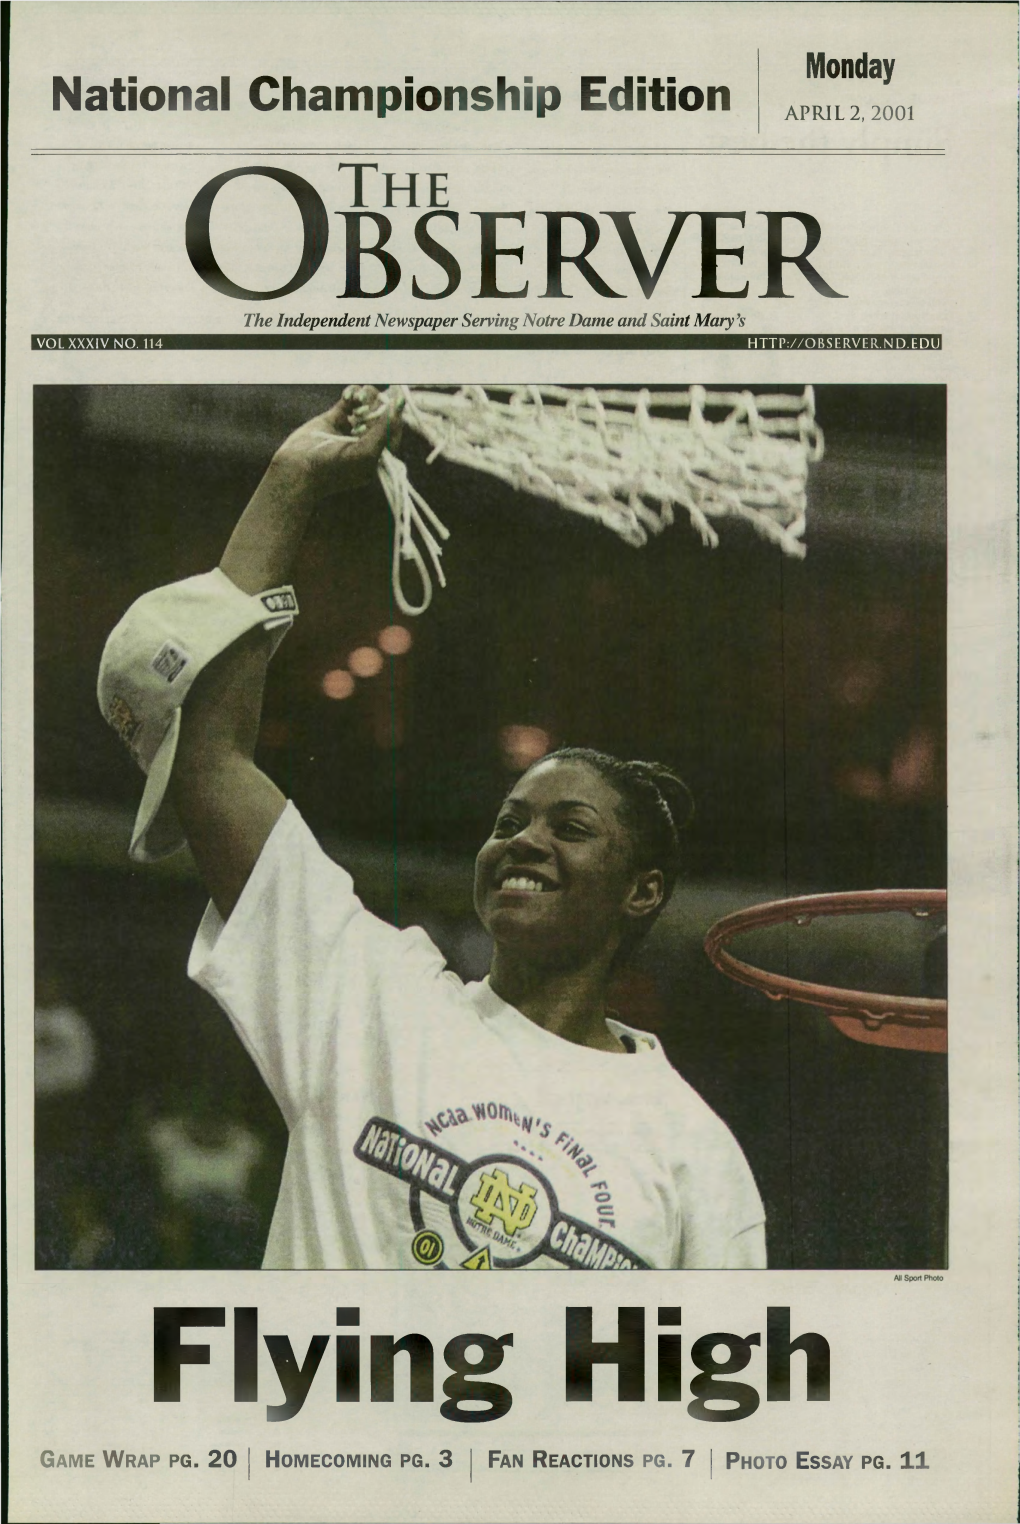 National Championship Edition APRIL 2, 2001 O Bserver the Independent Newspaper Serving Notre Dame and Saint Mary’S VOL XXXIV NO